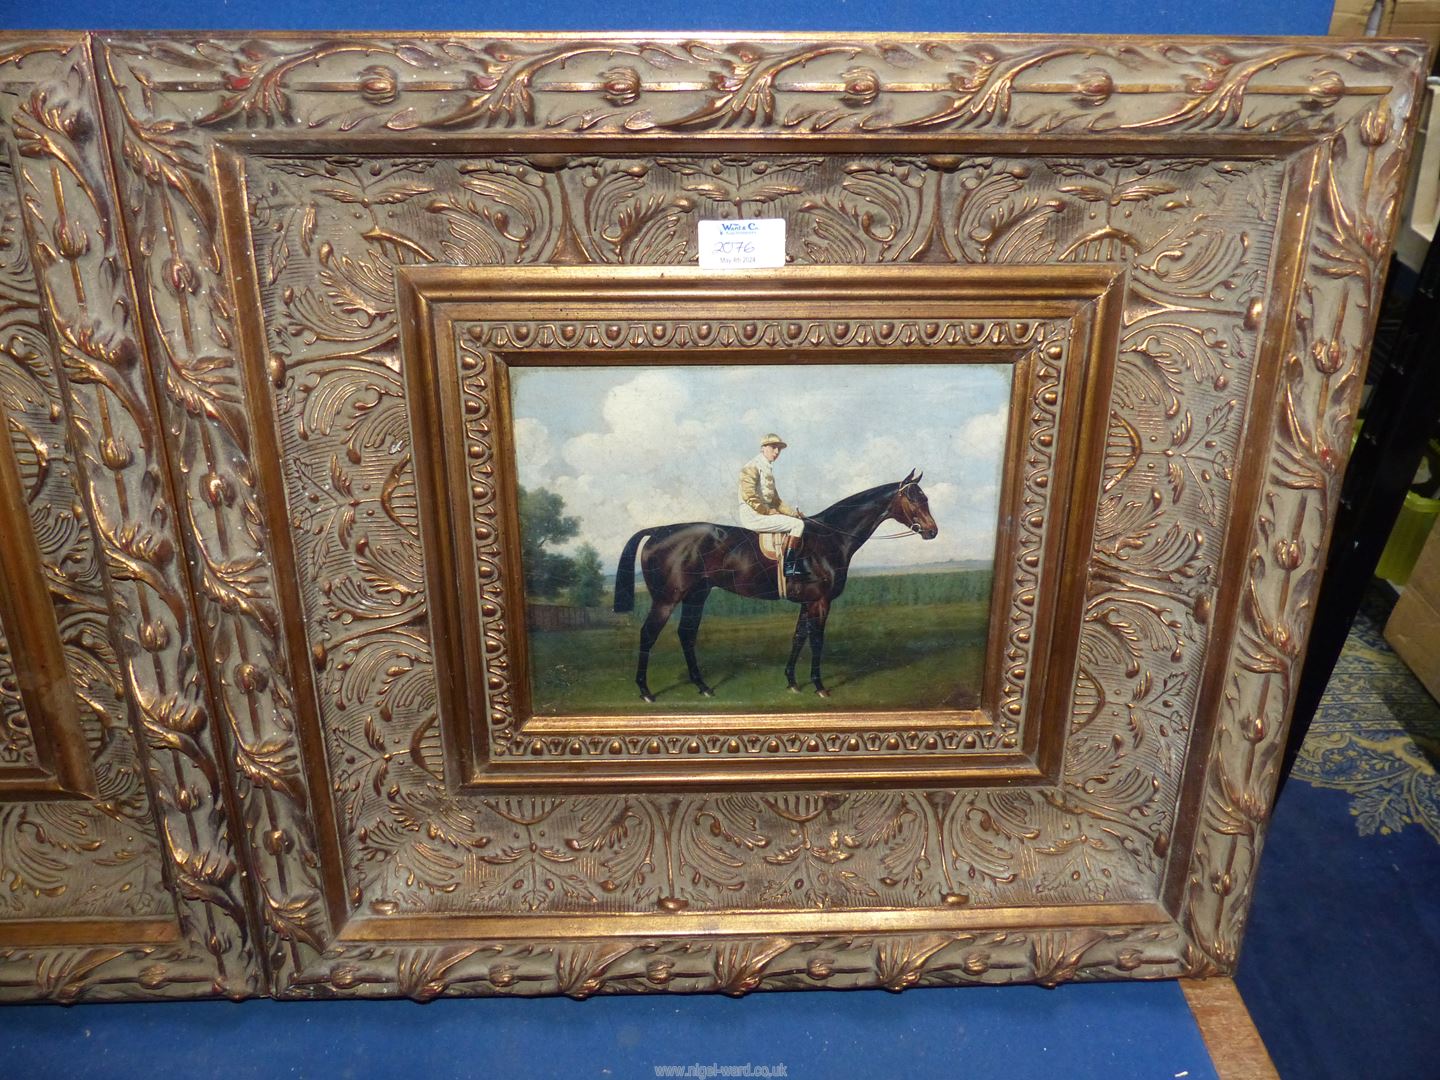 Two large gilt framed Prints on canvas depicting thoroughbred horses one with a mounted jockey. - Image 3 of 3